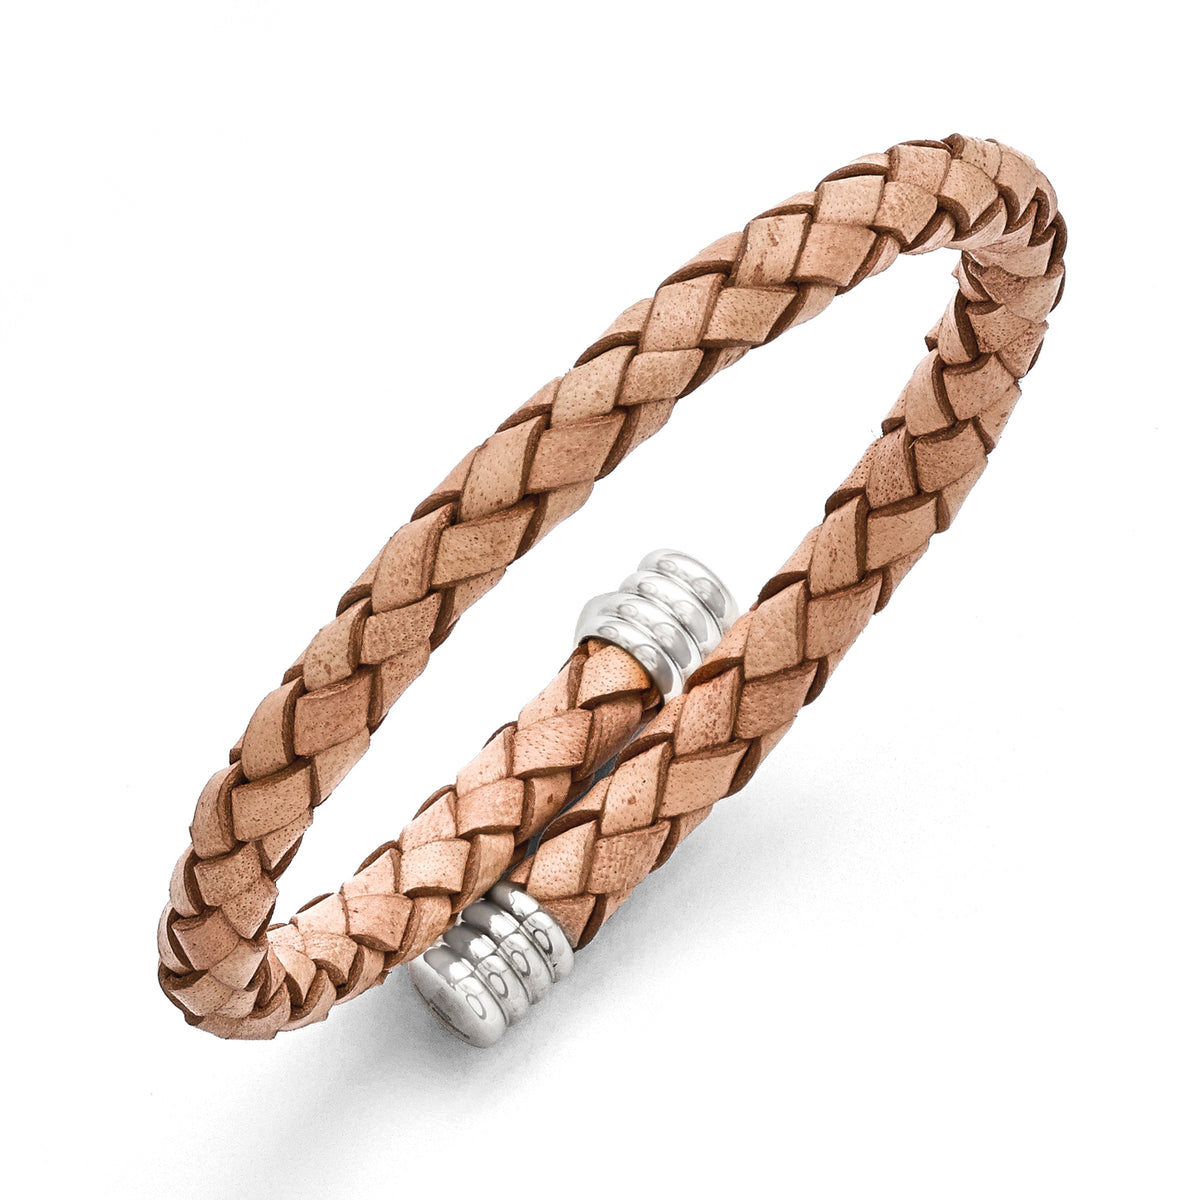 Stainless Steel Polished Adjustable Tan Woven Leather Wrap Bracelet